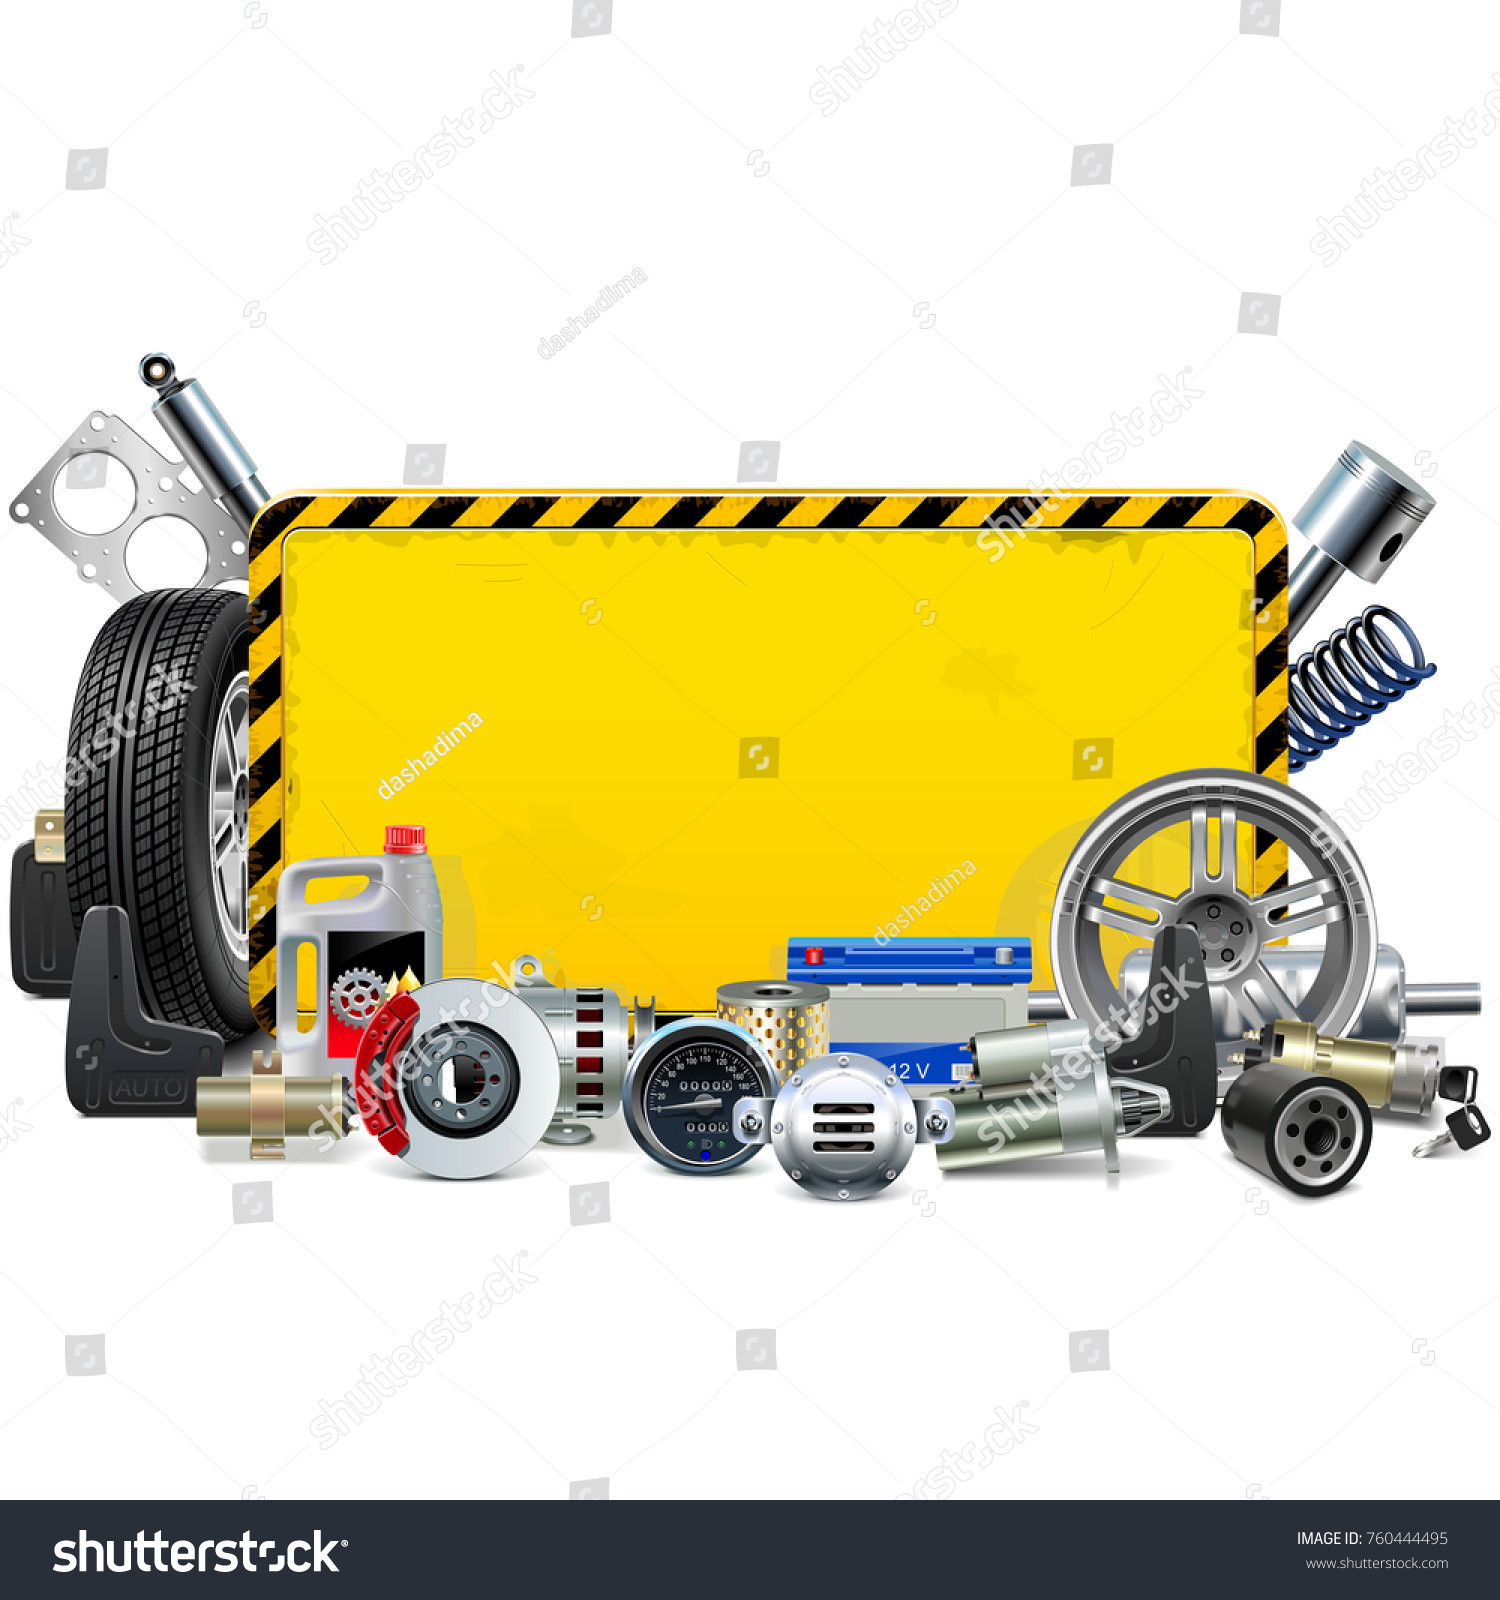 SVG of Vector Car Spares Yellow Frame isolated on white background
 svg